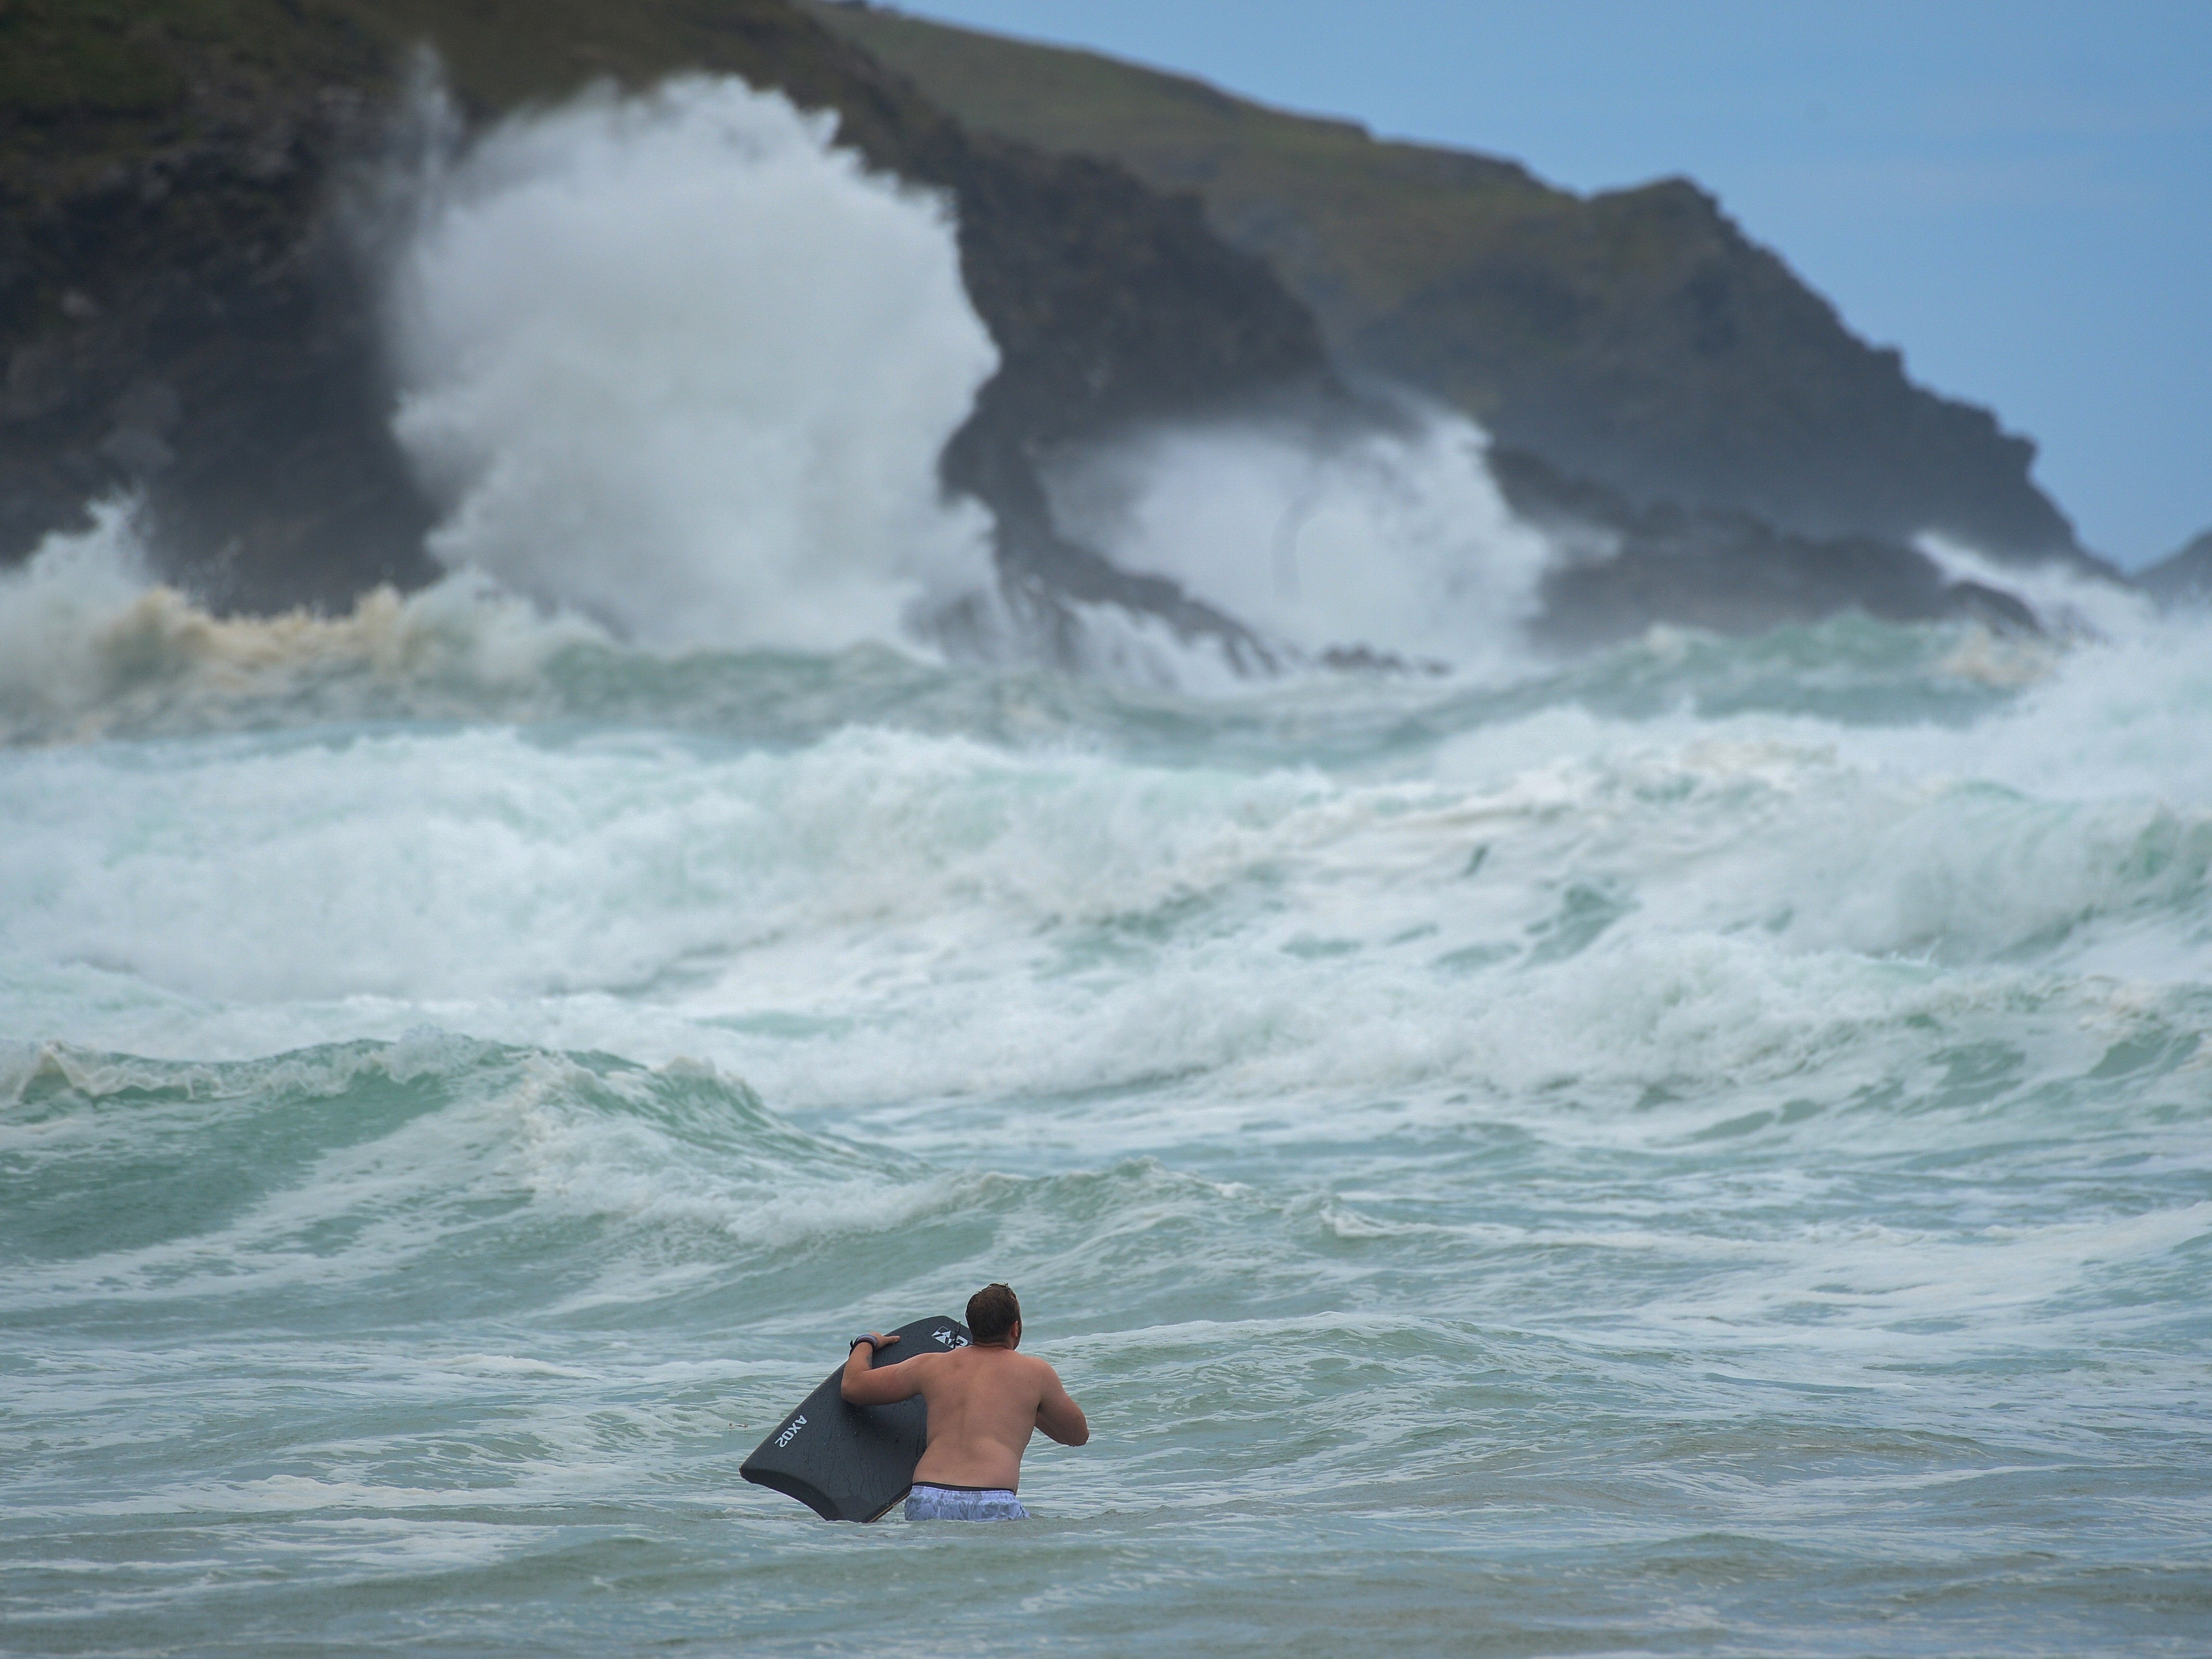 <p>Bodyboarders brave the waves in rough seas at Fistral beach on 30 July 2021 in Newquay, United Kingdom. Storm Evert is the UK’s fourth named storm since October 2020</p>